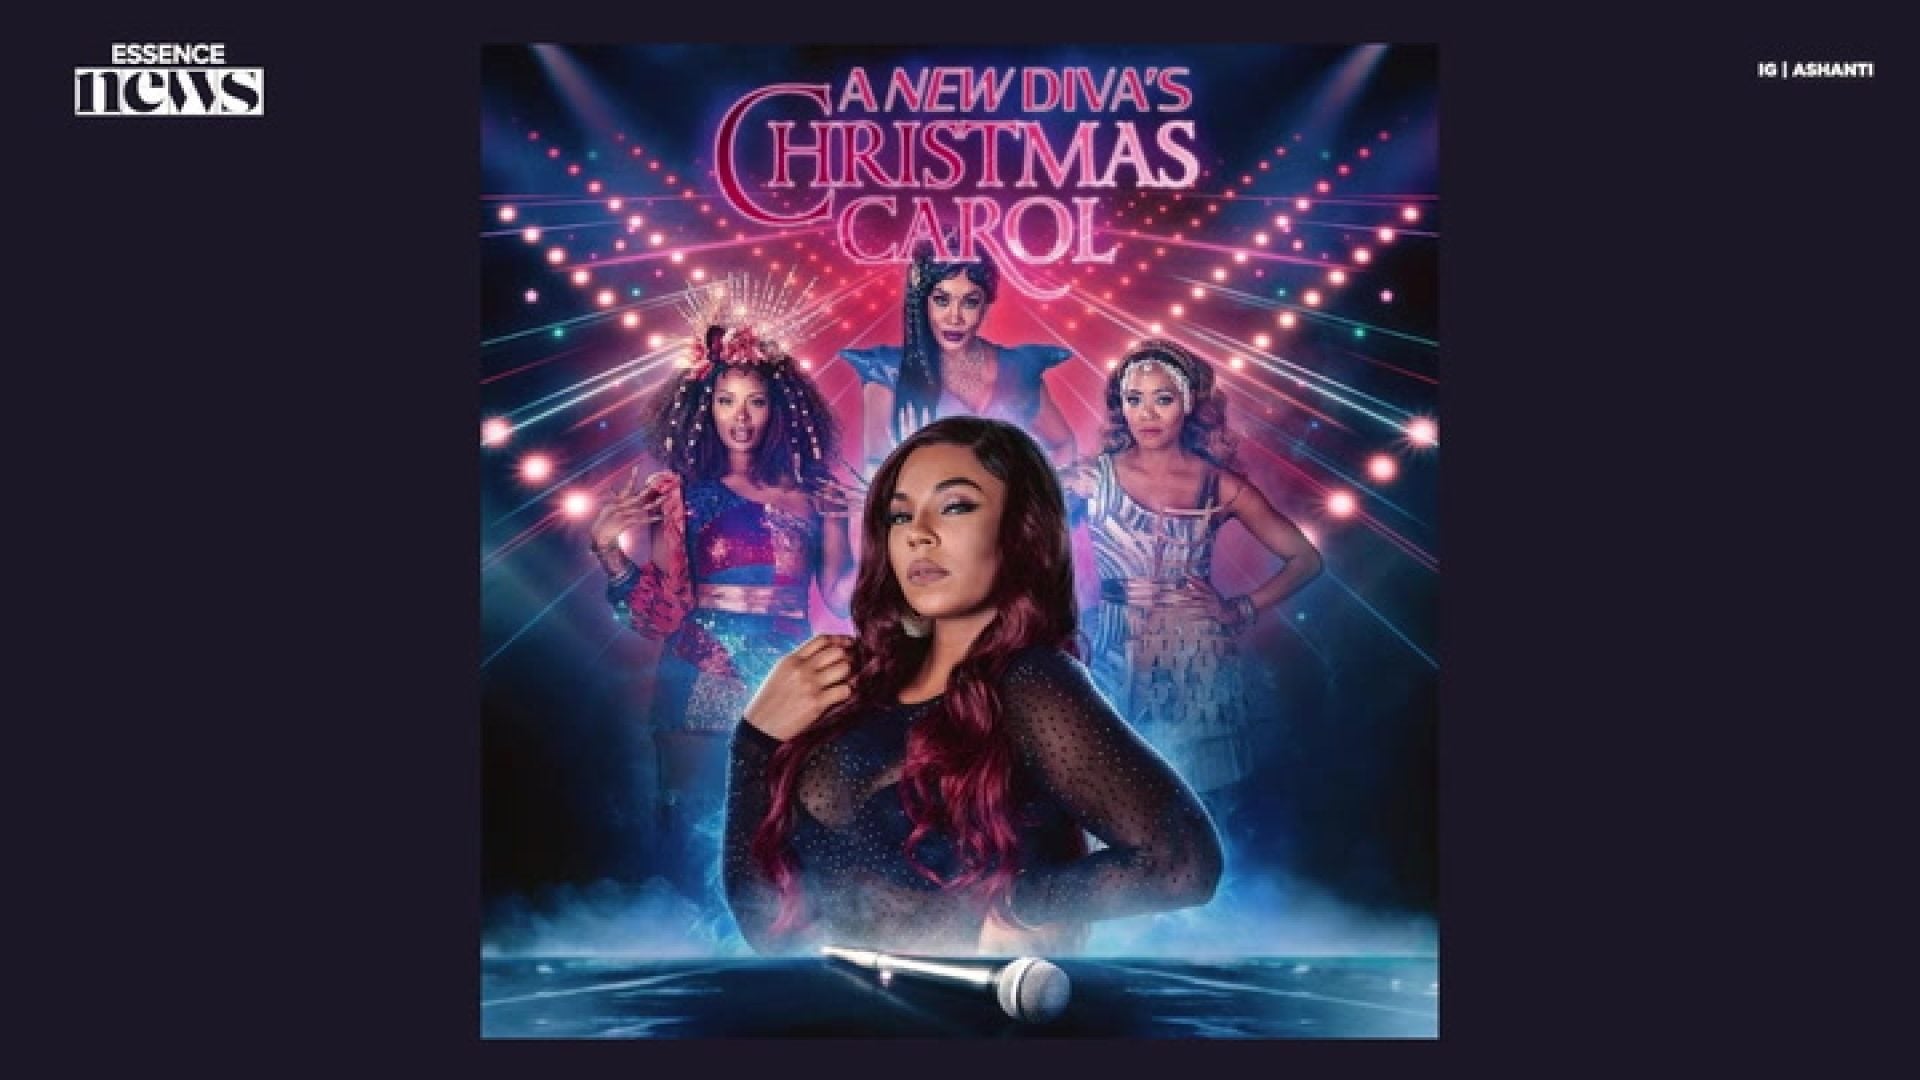 WATCH: Ashanti Revisits A Cult Classic With 'A New Diva's Christmas Carol'